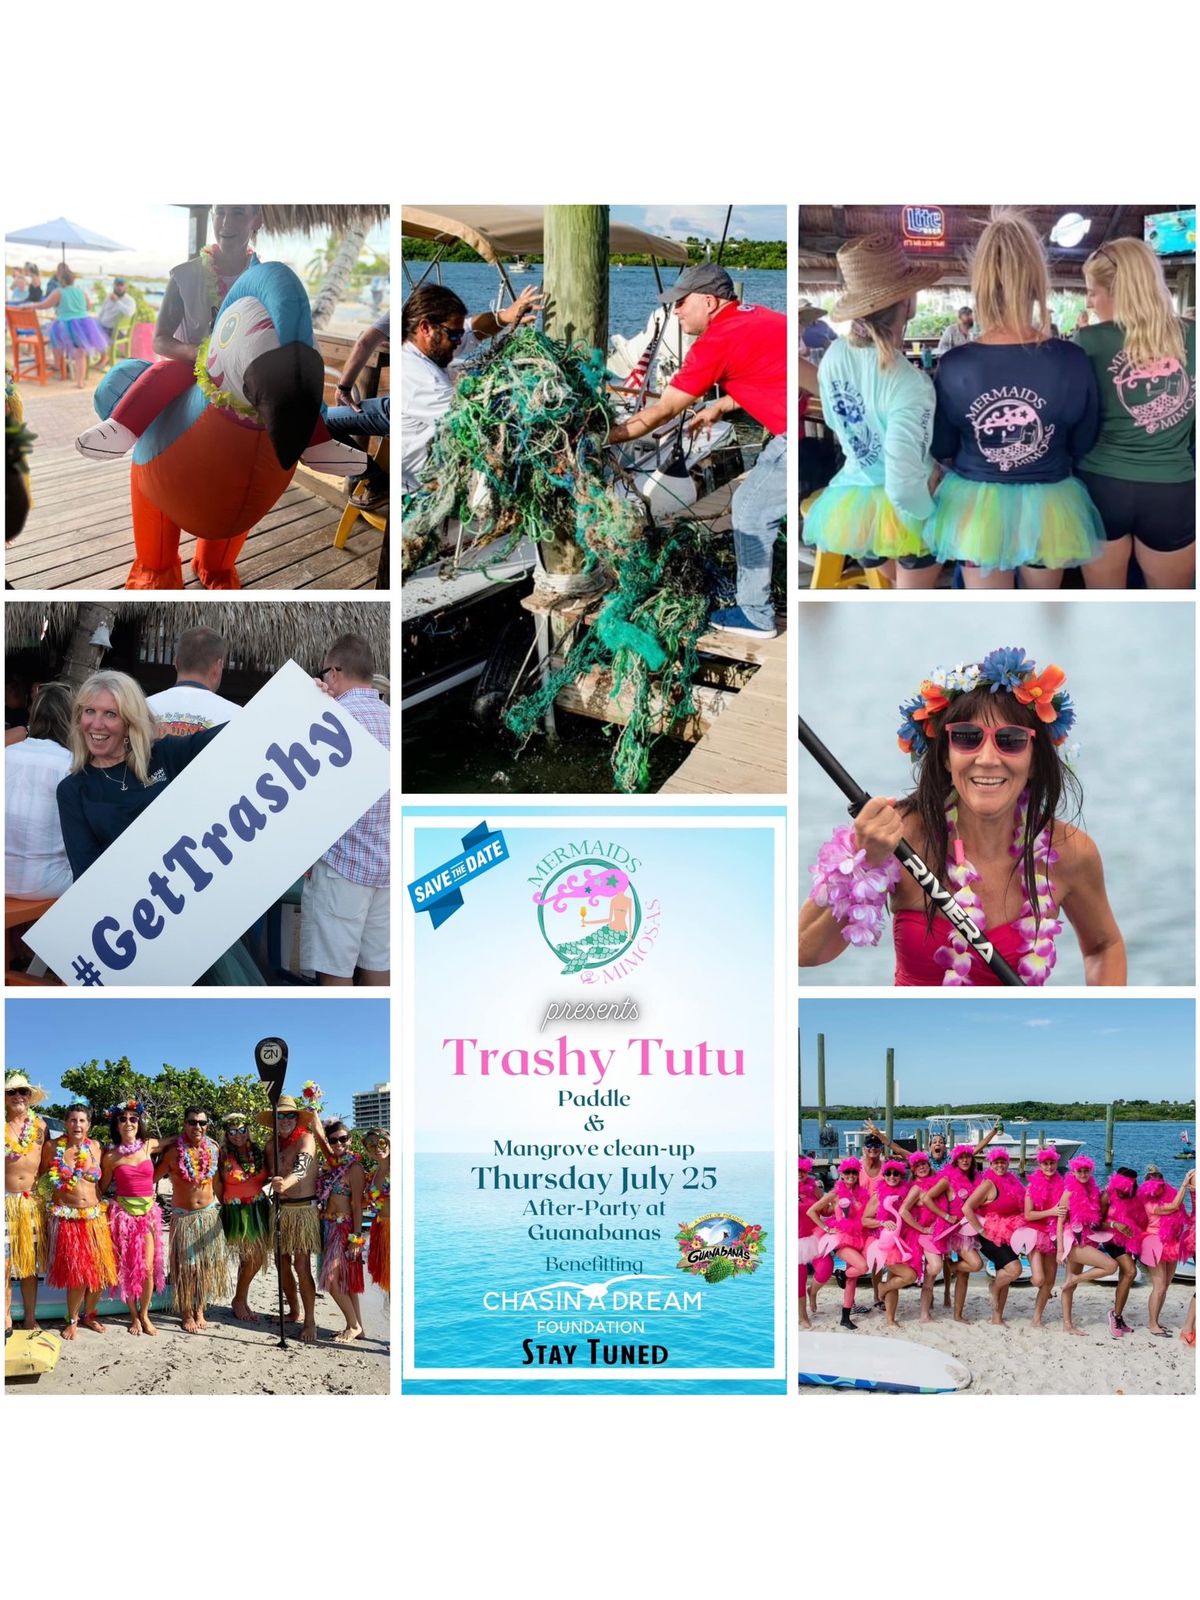 Trashy Tutu Mangrove Clean-Up to benefit Chasin a Dream Foundation